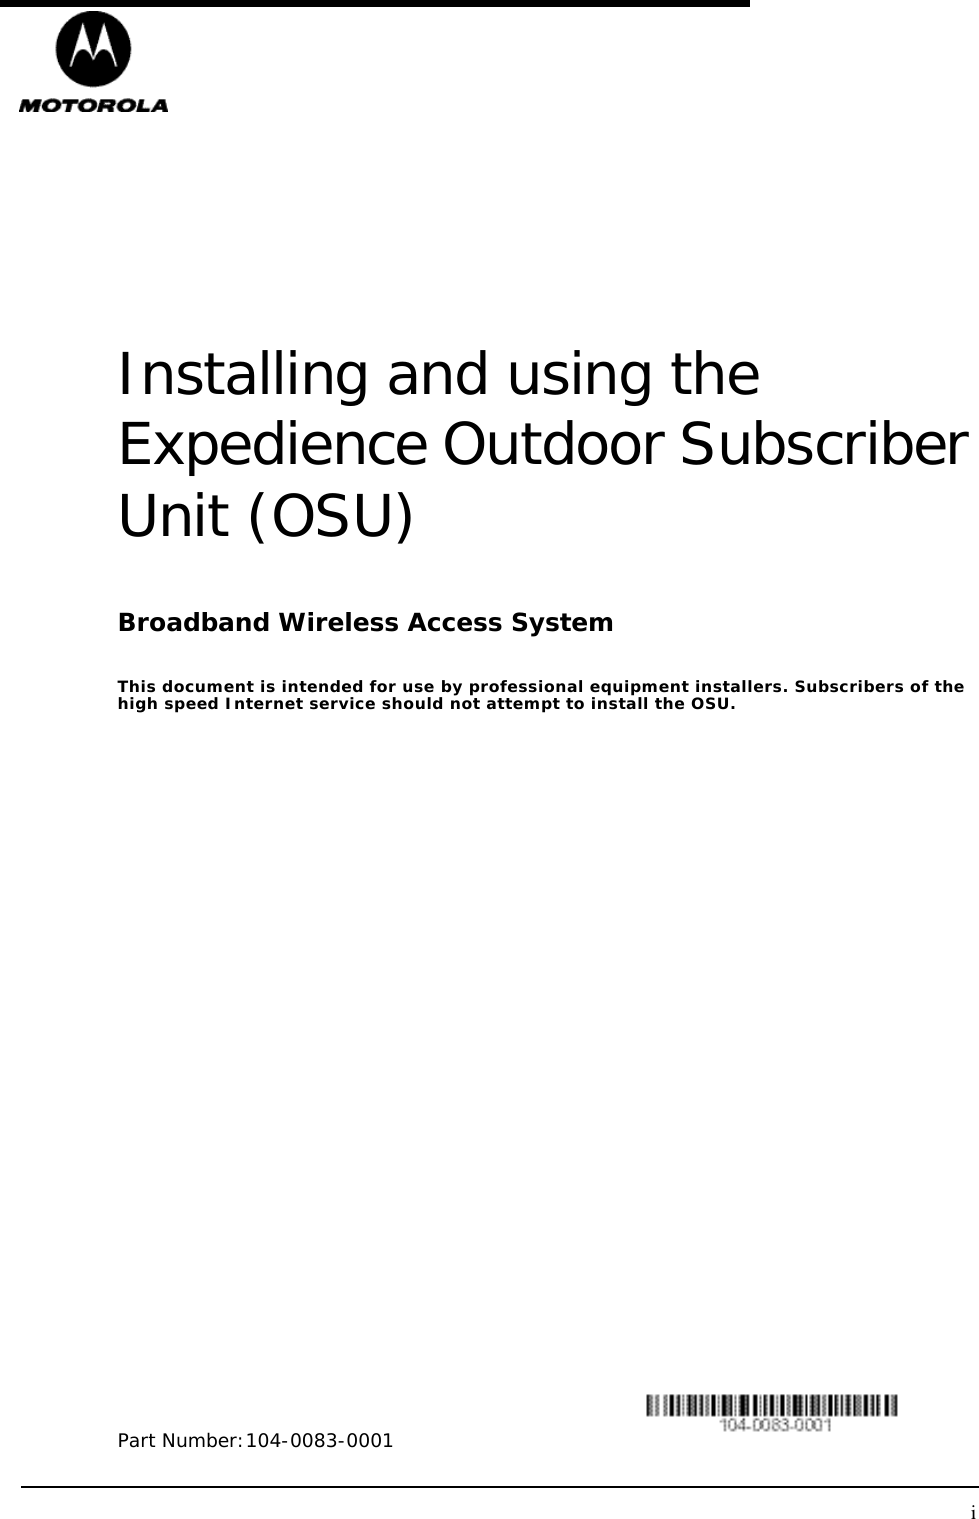 iInstalling and using the Expedience Outdoor Subscriber Unit (OSU)Broadband Wireless Access SystemThis document is intended for use by professional equipment installers. Subscribers of the high speed Internet service should not attempt to install the OSU.Part Number:104-0083-0001